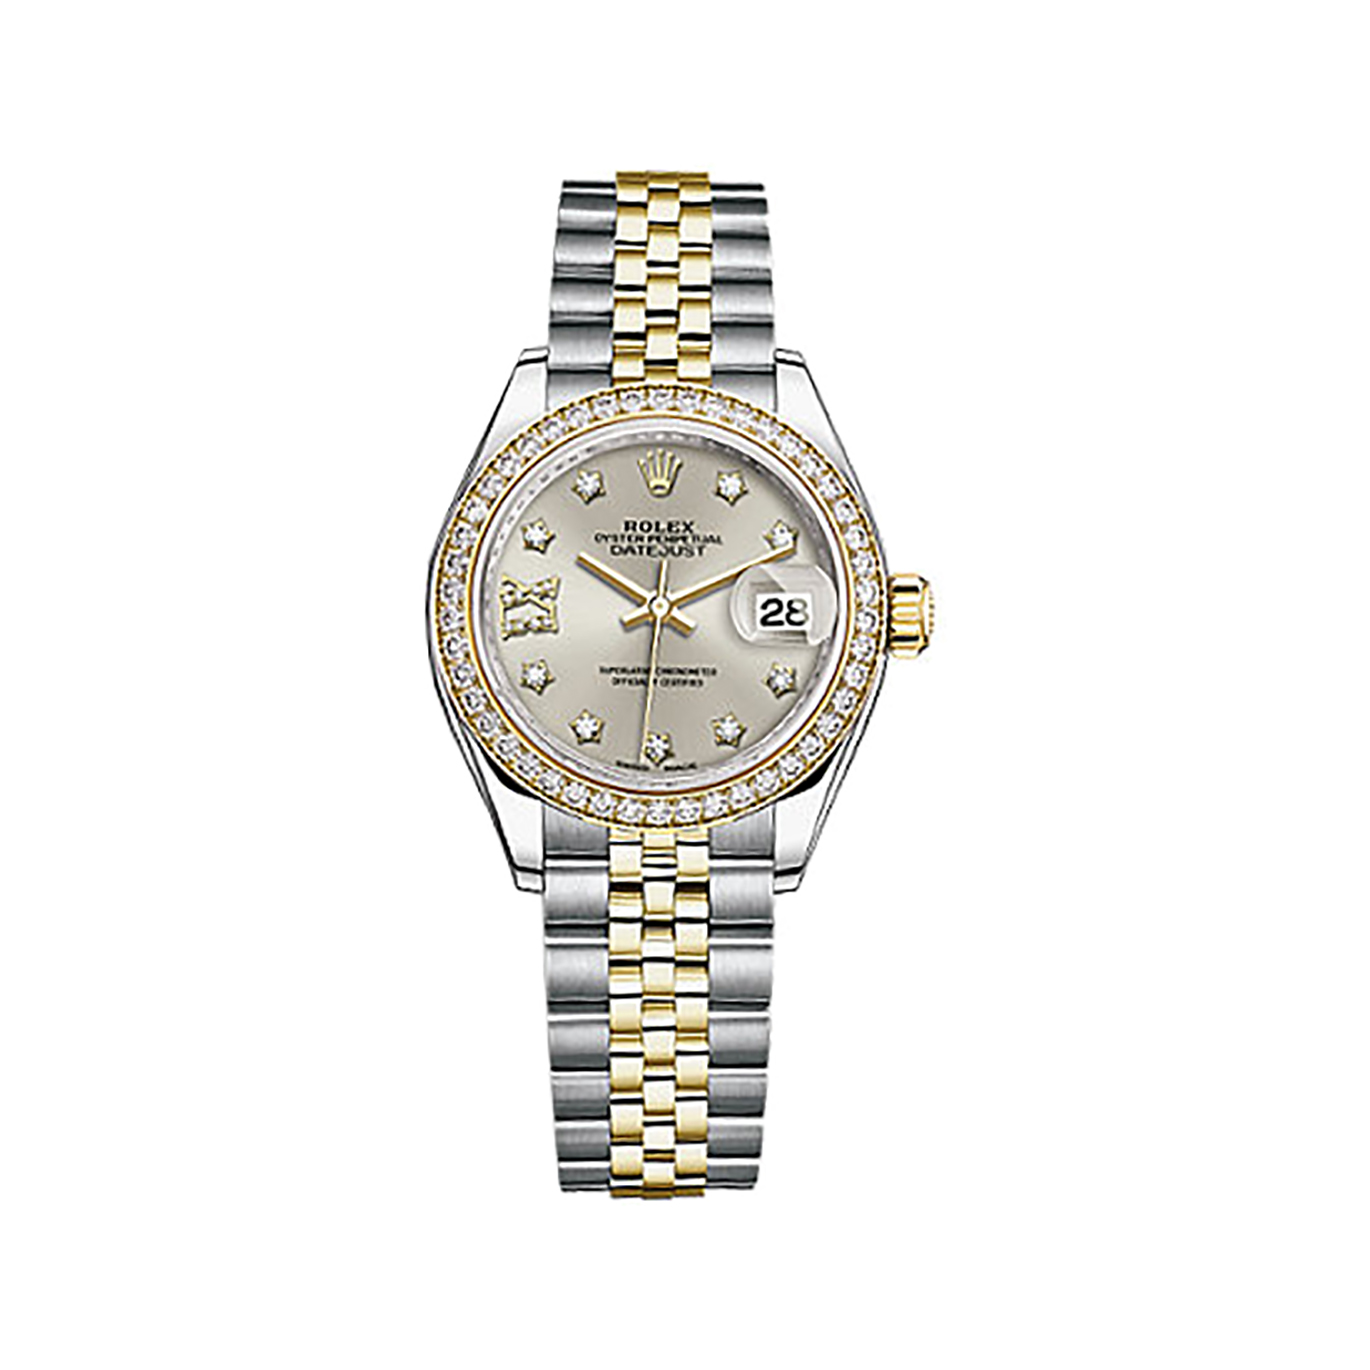 Lady-Datejust 28 279383RBR Gold & Stainless Steel & Diamonds Watch (Silver Set with Diamonds)